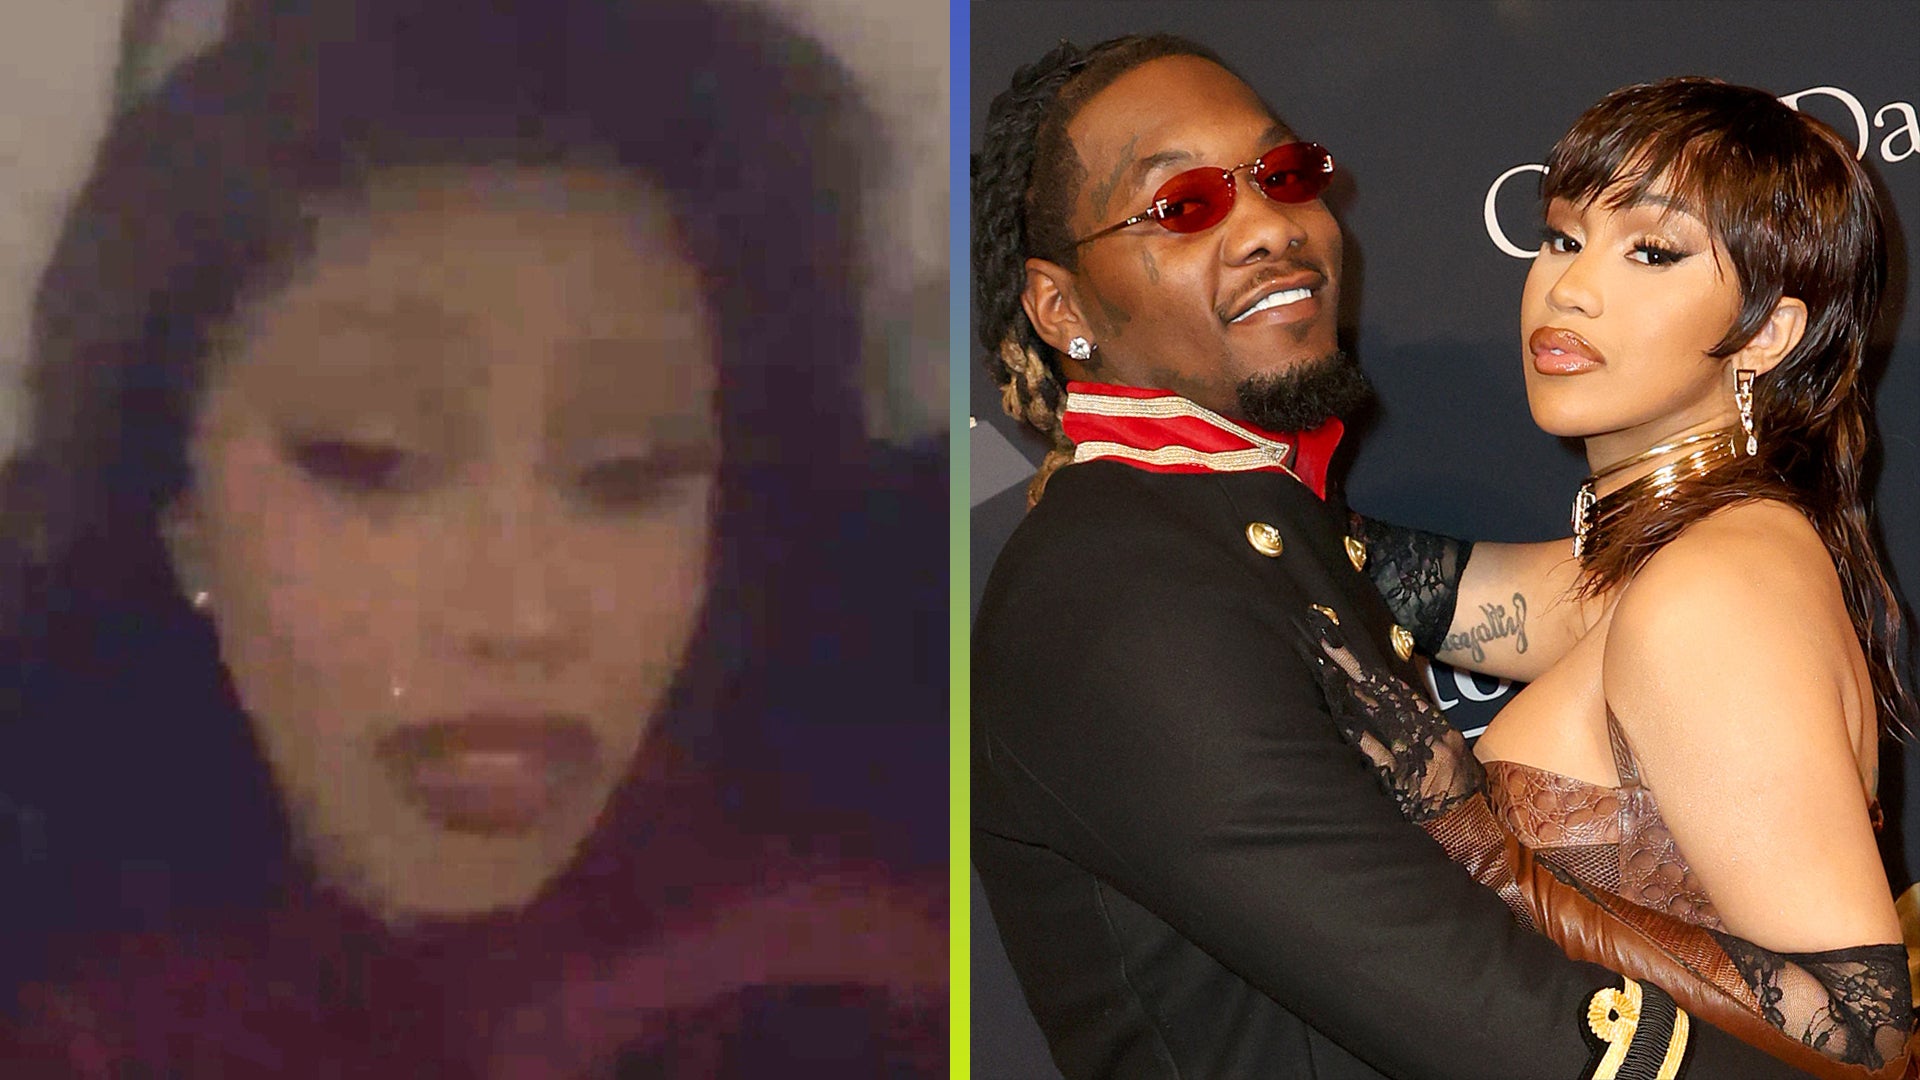 Cardi B Confirms Breakup From Offset, Reveals She’s Been Single ‘For a While’